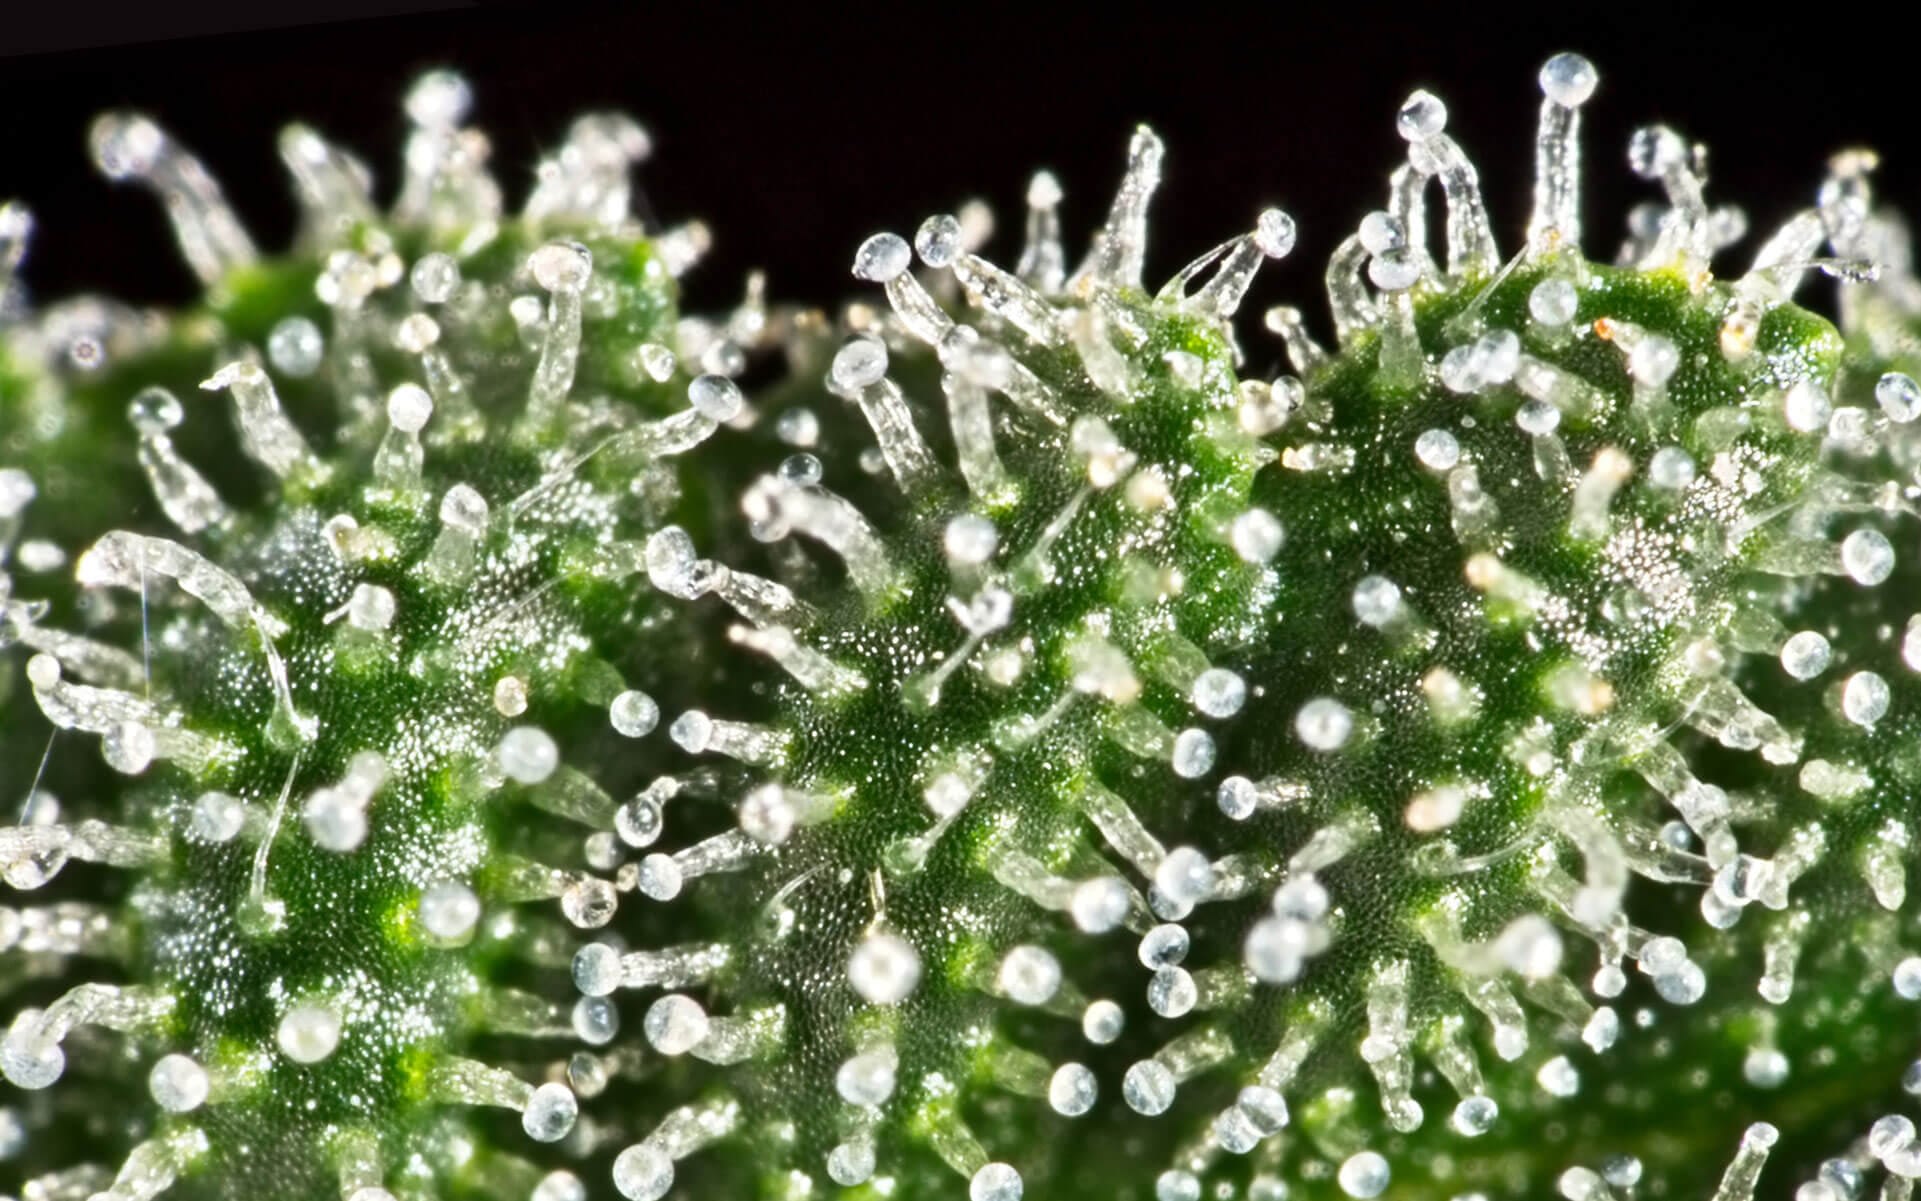 The Crystals of Trichomes